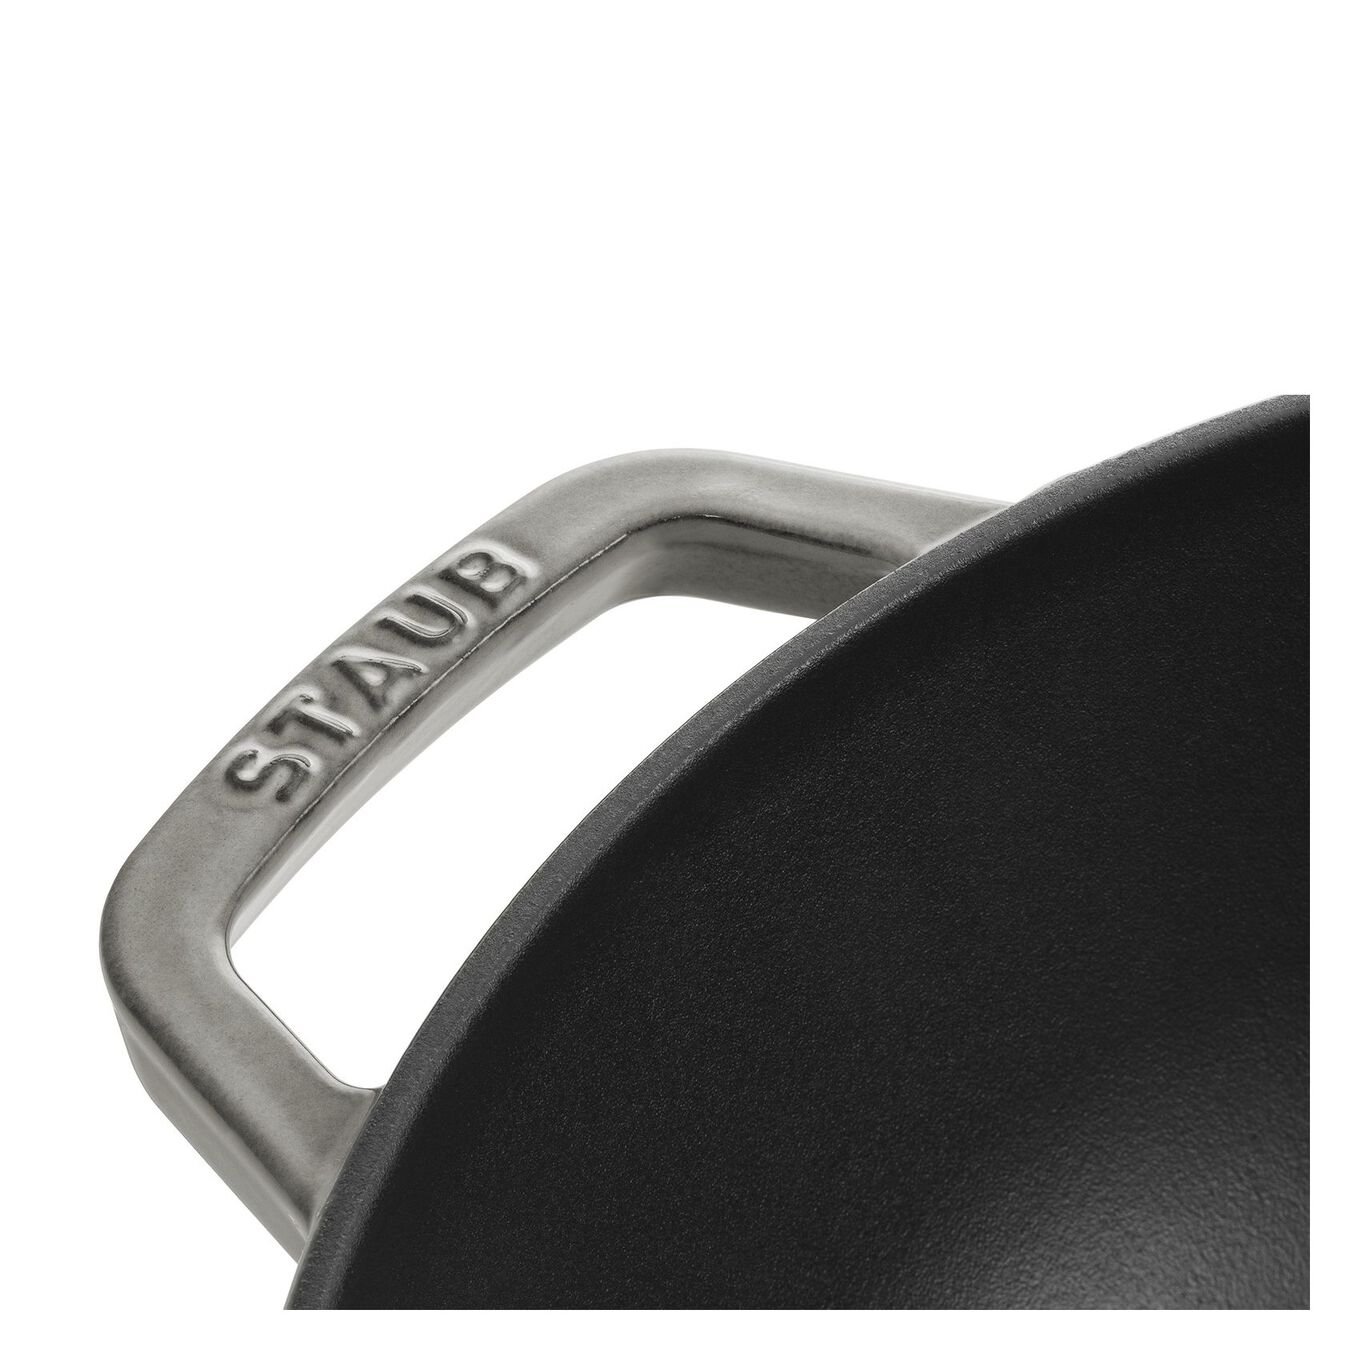 12-inch, Perfect Pan, graphite grey,,large 3